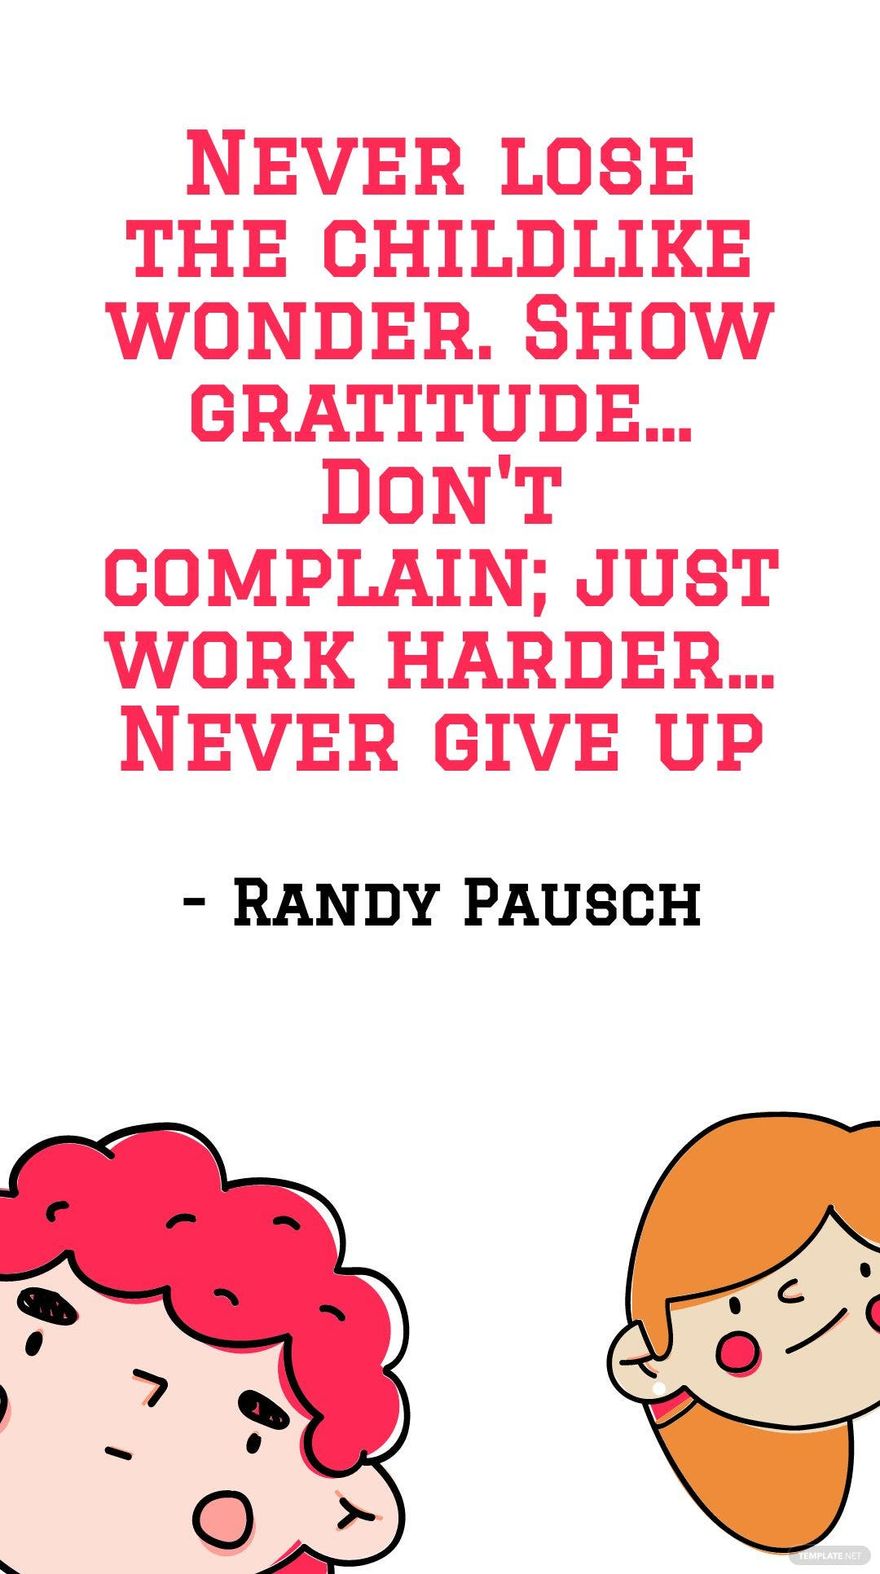 Randy Pausch - Never lose the childlike wonder. Show gratitude... Don't complain; just work harder... Never give up in JPG